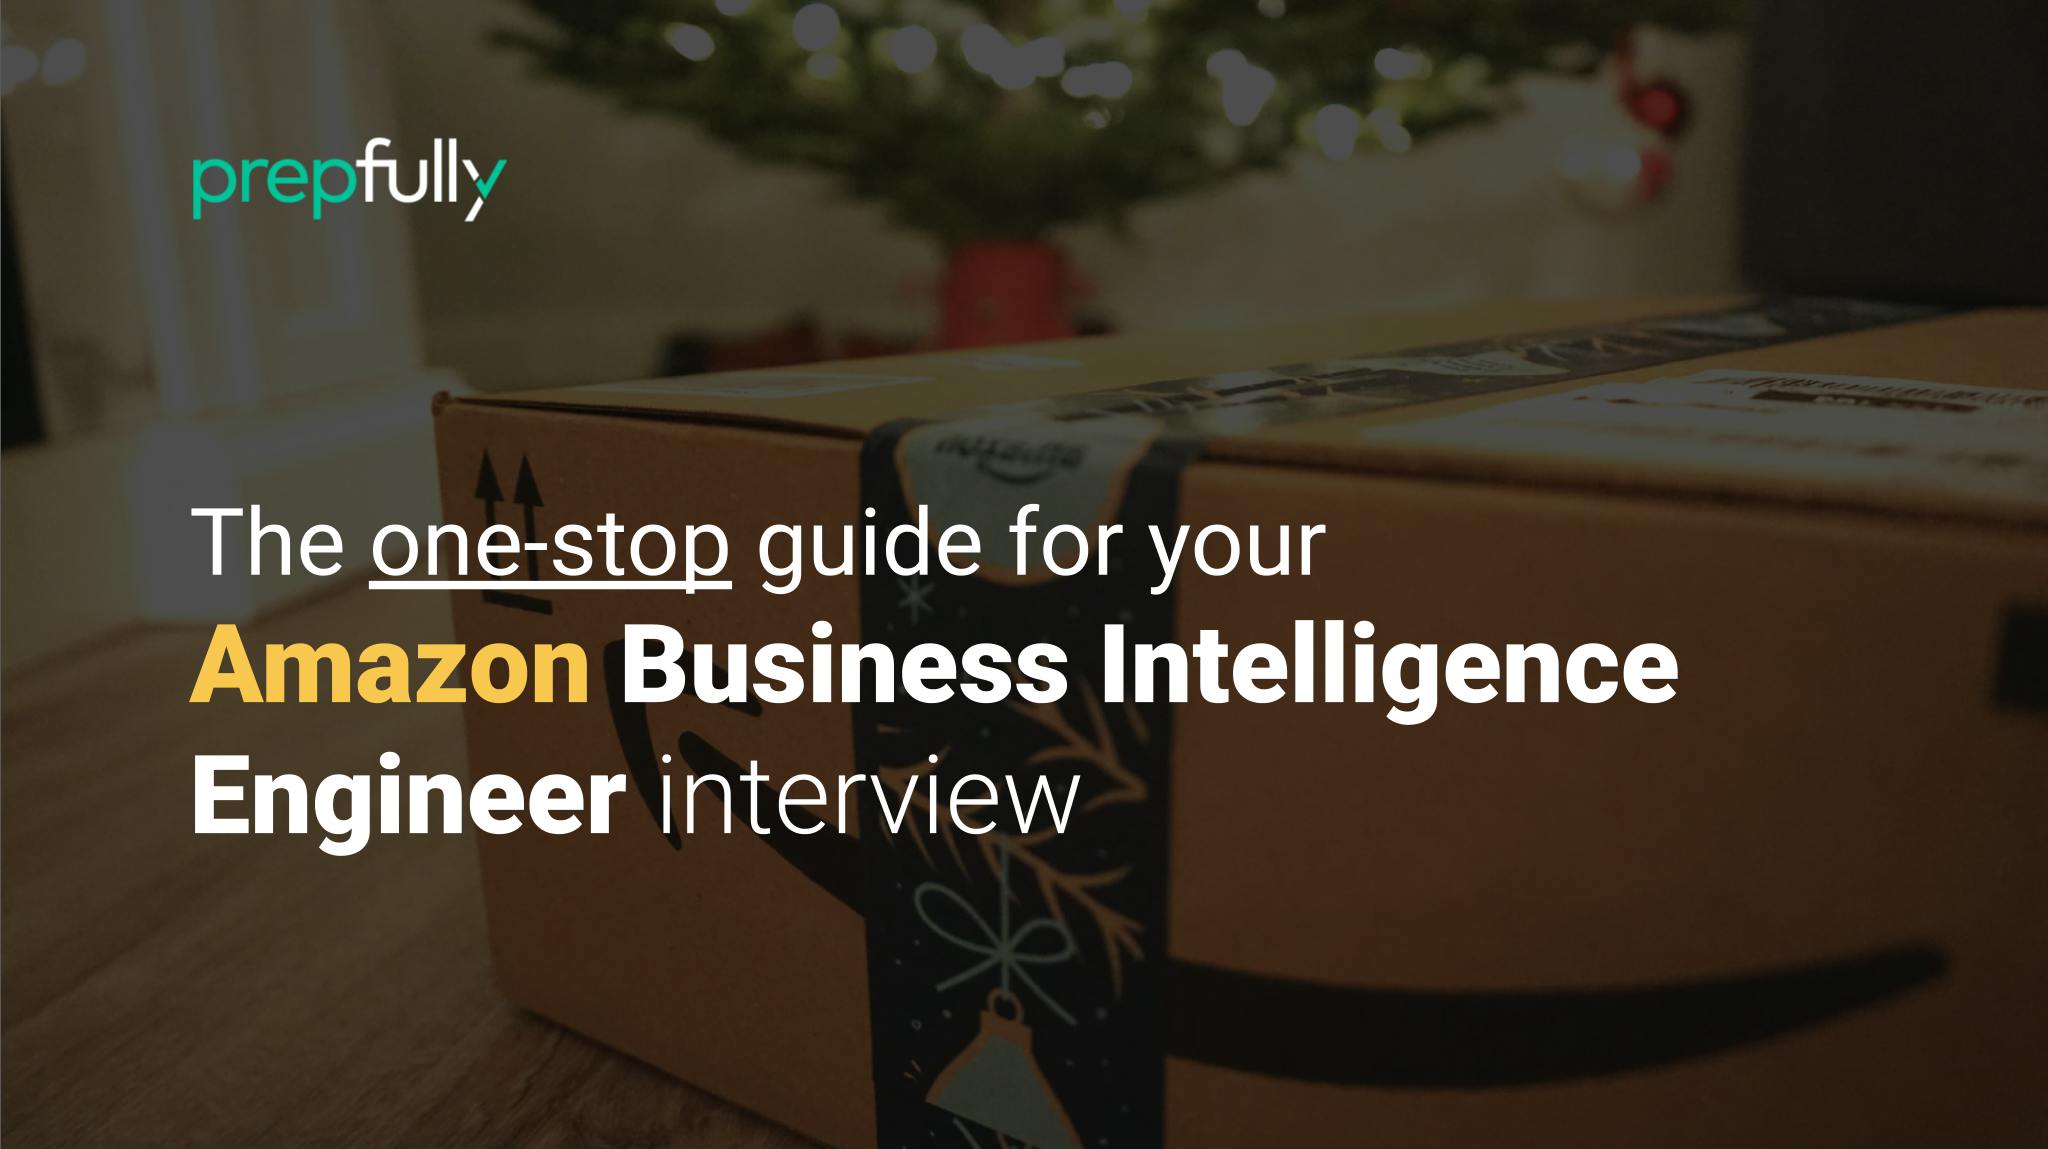 Interview guide for Amazon Business Intelligence Engineer